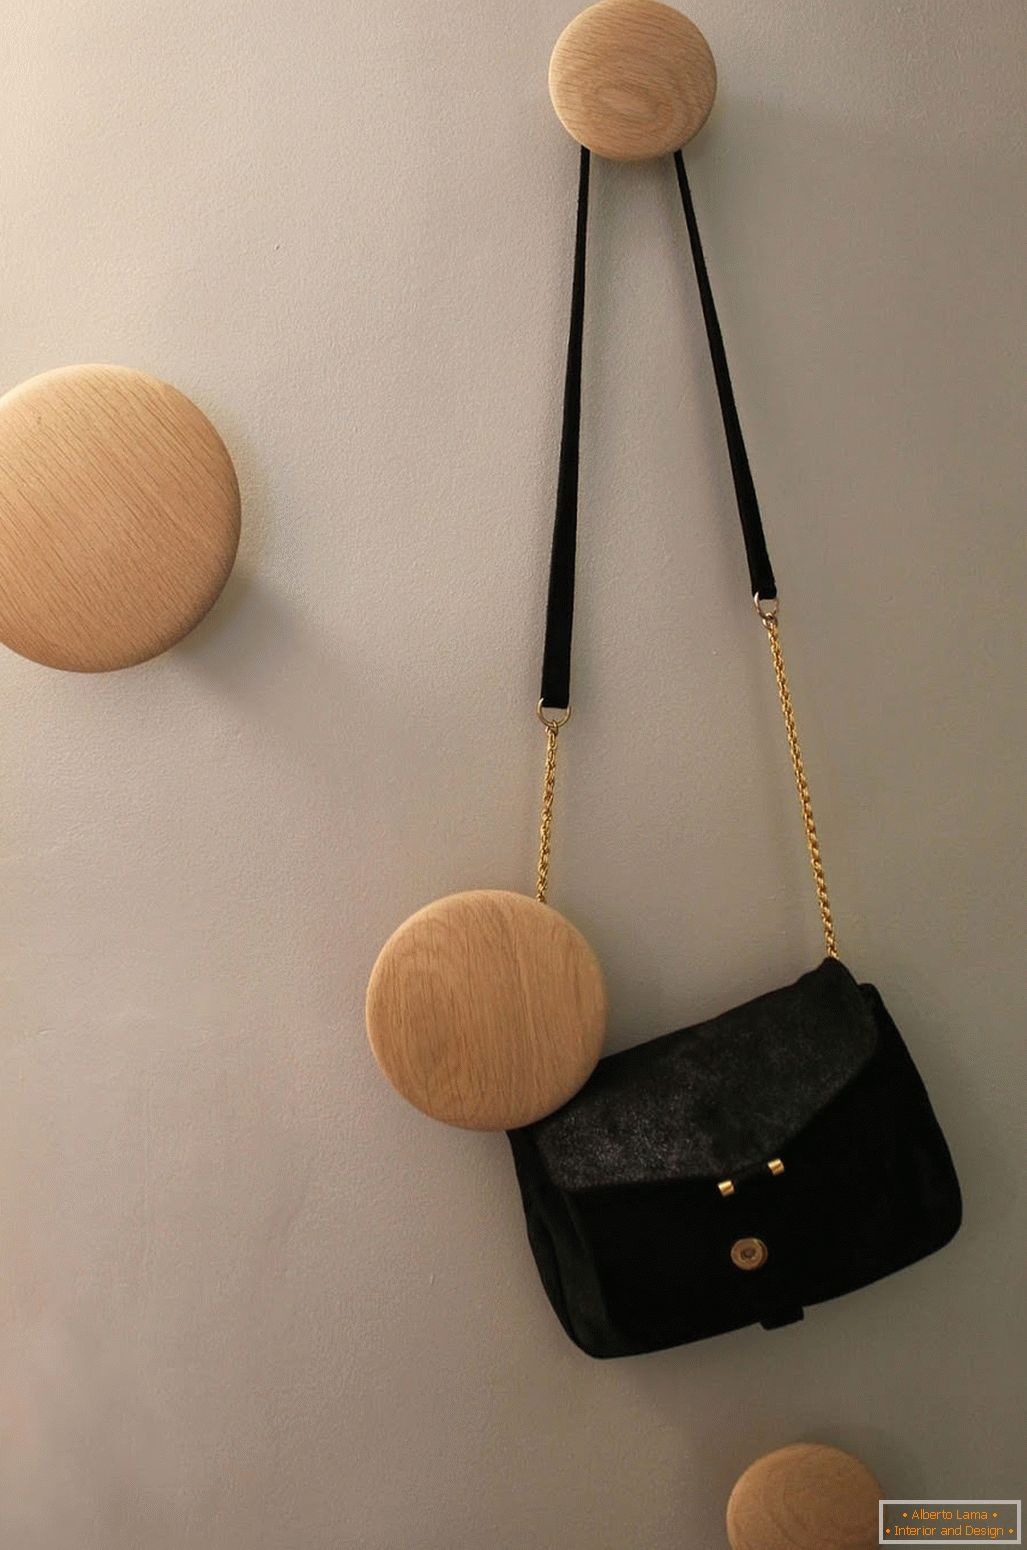 Wooden hangers on the wall of a stylish small studio apartment